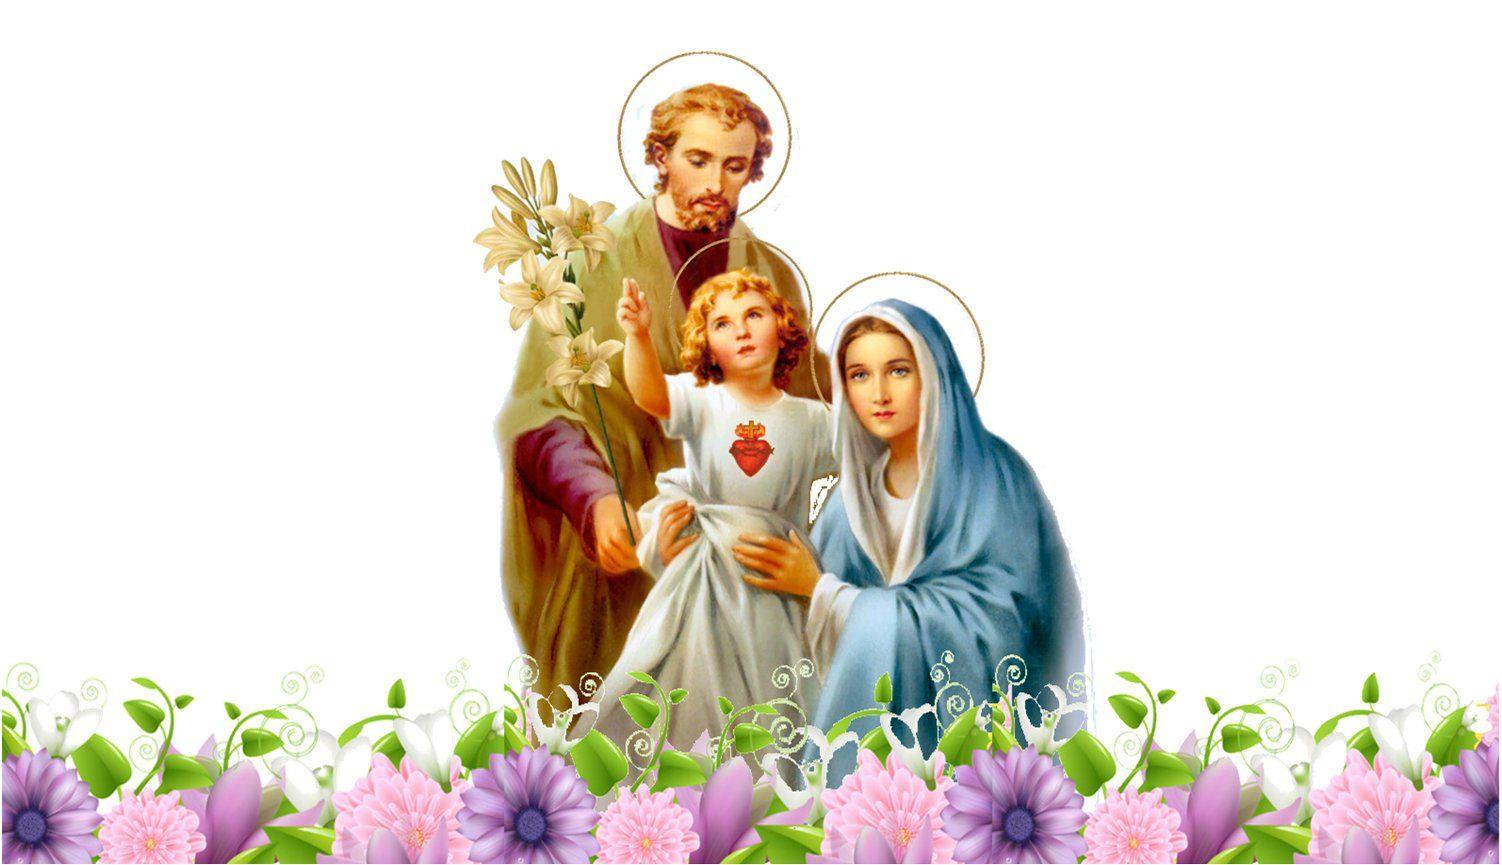 Holy family Download HD Wallpaper and Free Image